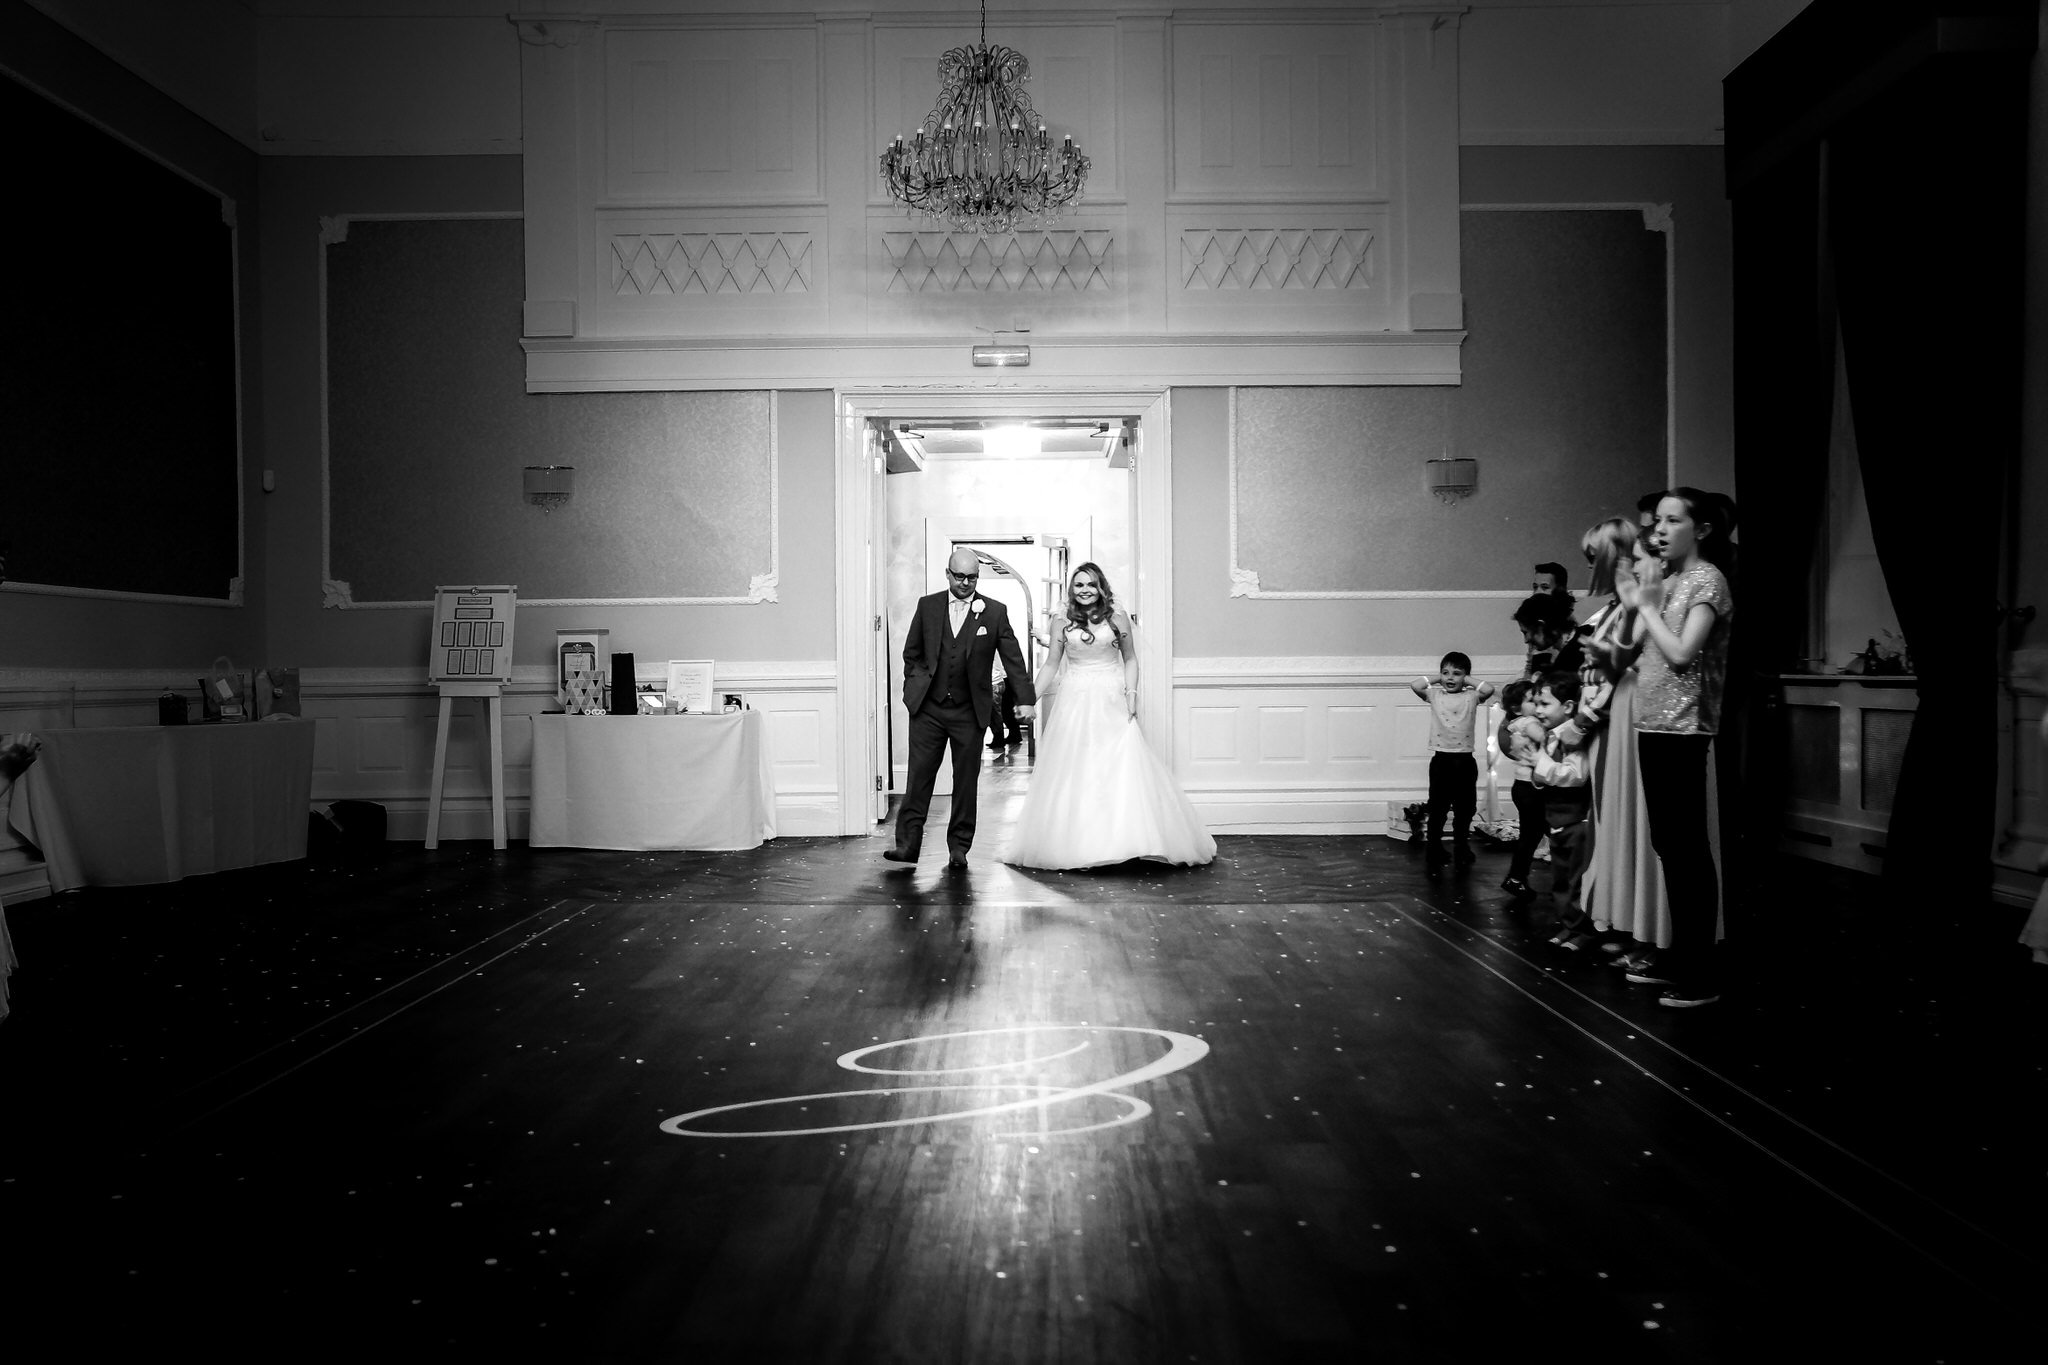 Entrance and married couple - Authentic Wedding photography.jpg